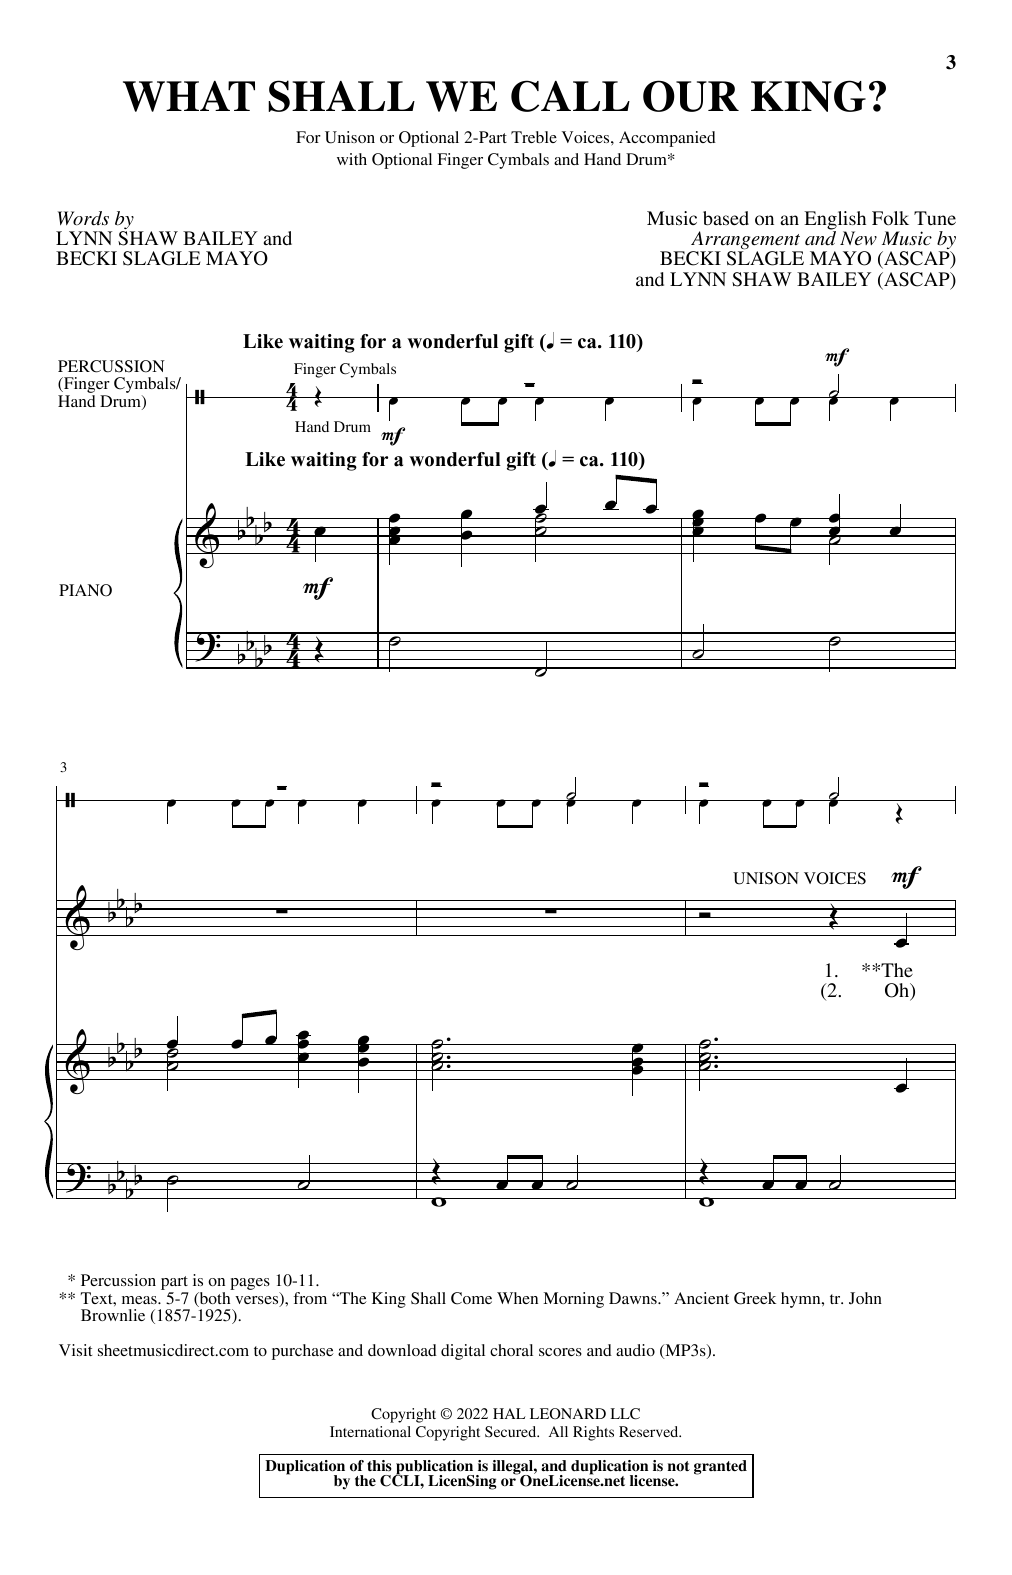 Download Lynn Shaw Bailey and Becki Slagle Ma What Shall We Call Our King? Sheet Music